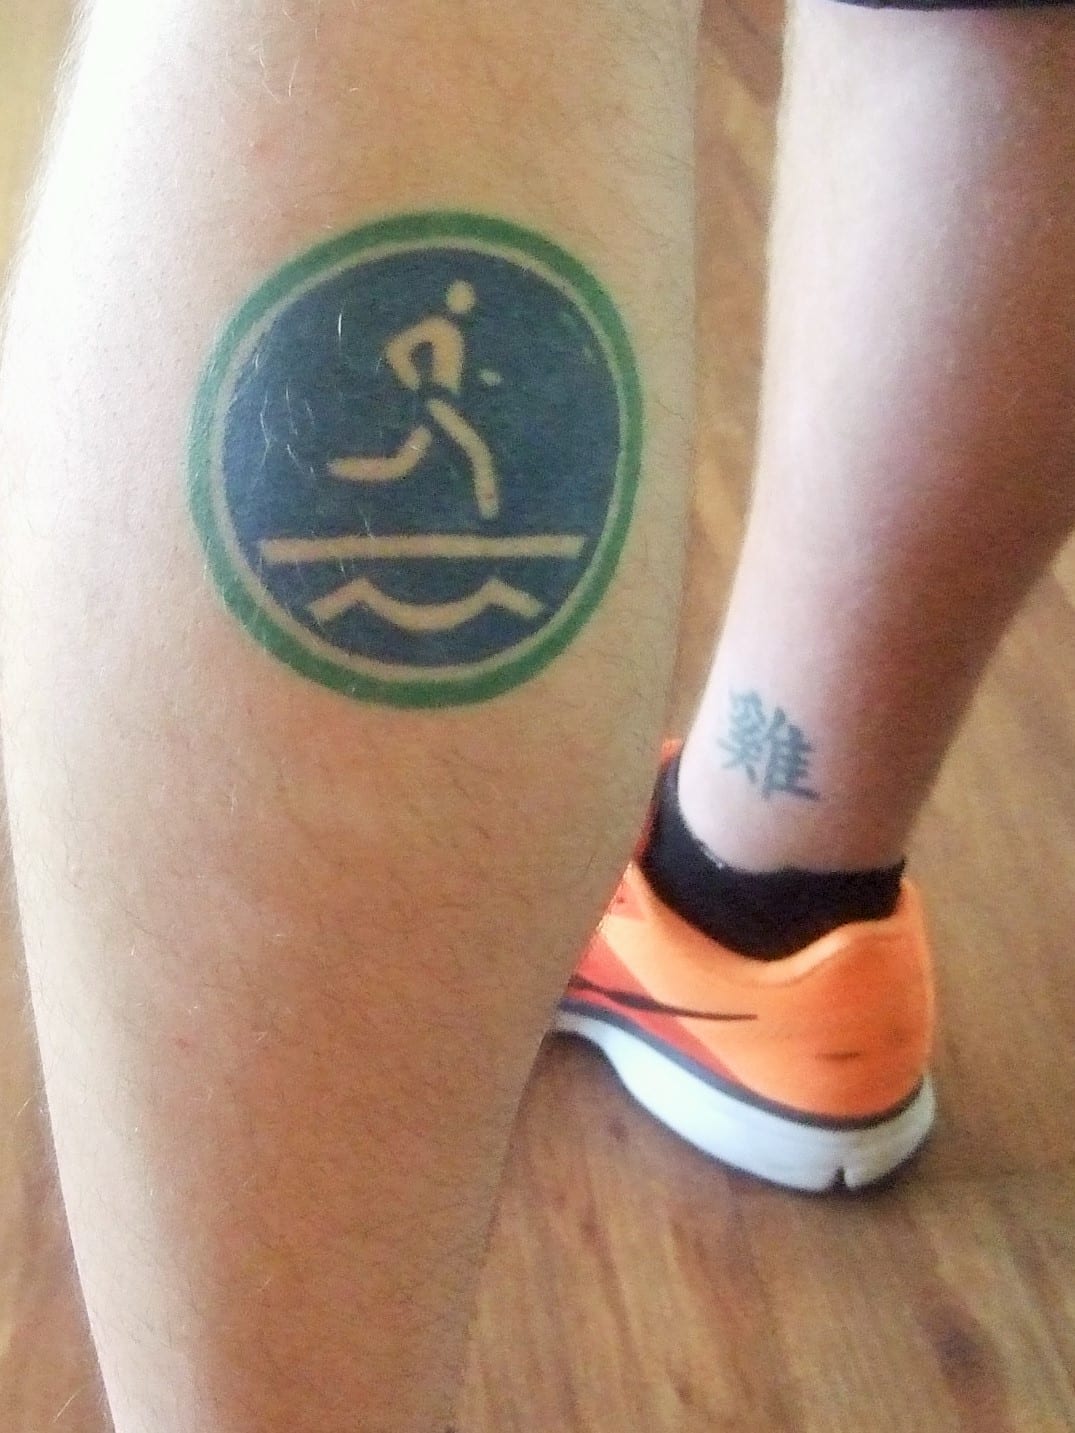 Tattoo uploaded by Jonathan Fritz • Running tattoo to commemorate my 5k,  10k, hal marathon, and full marathon all done in 2 months. • Tattoodo